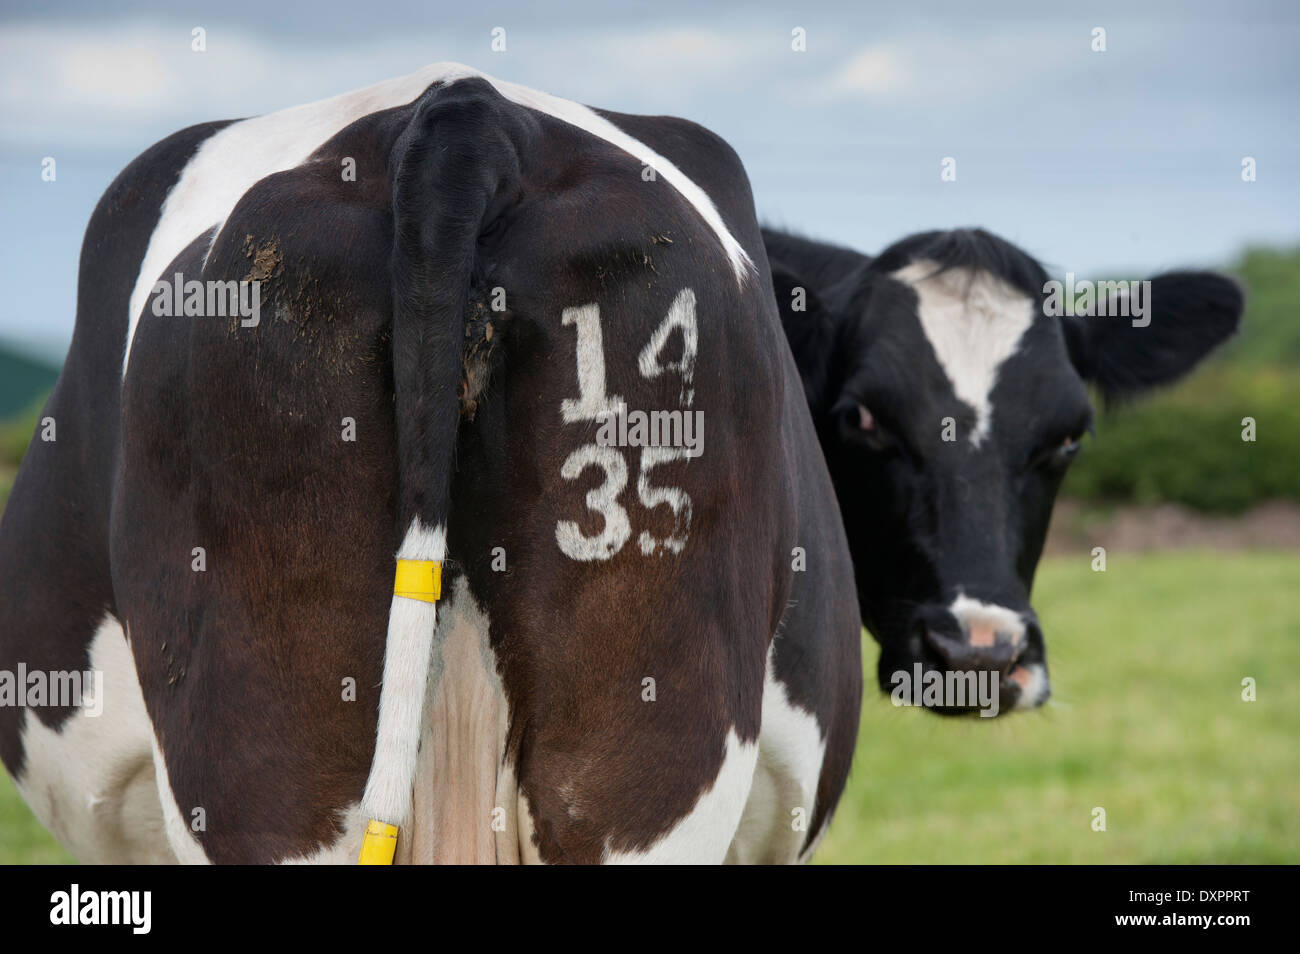 Cow with identification number freeze branded on its rear. Cumbria, UK Stock Photo